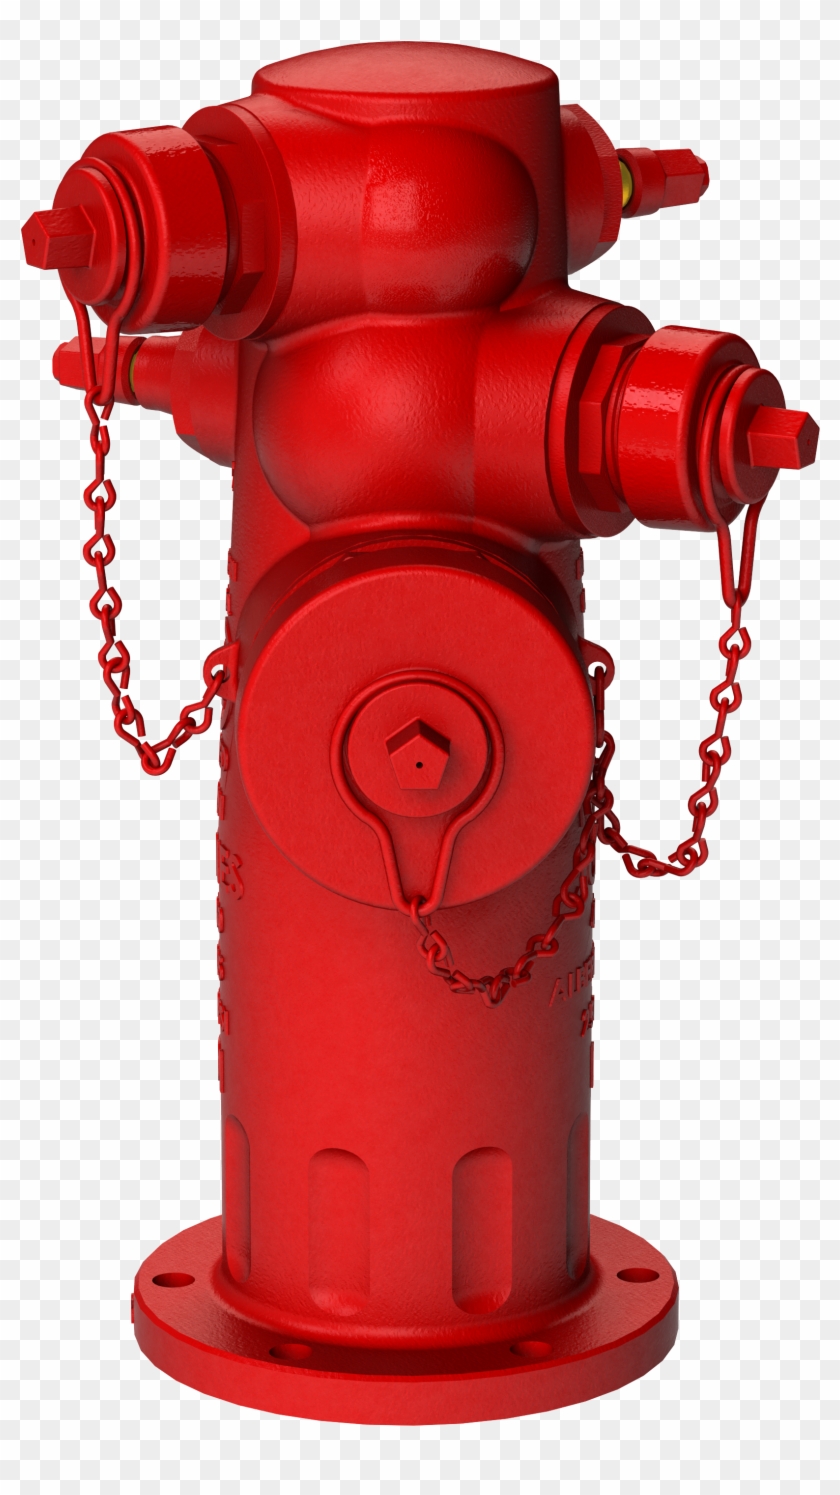 Download - Fire Hydrant Transparent #258441